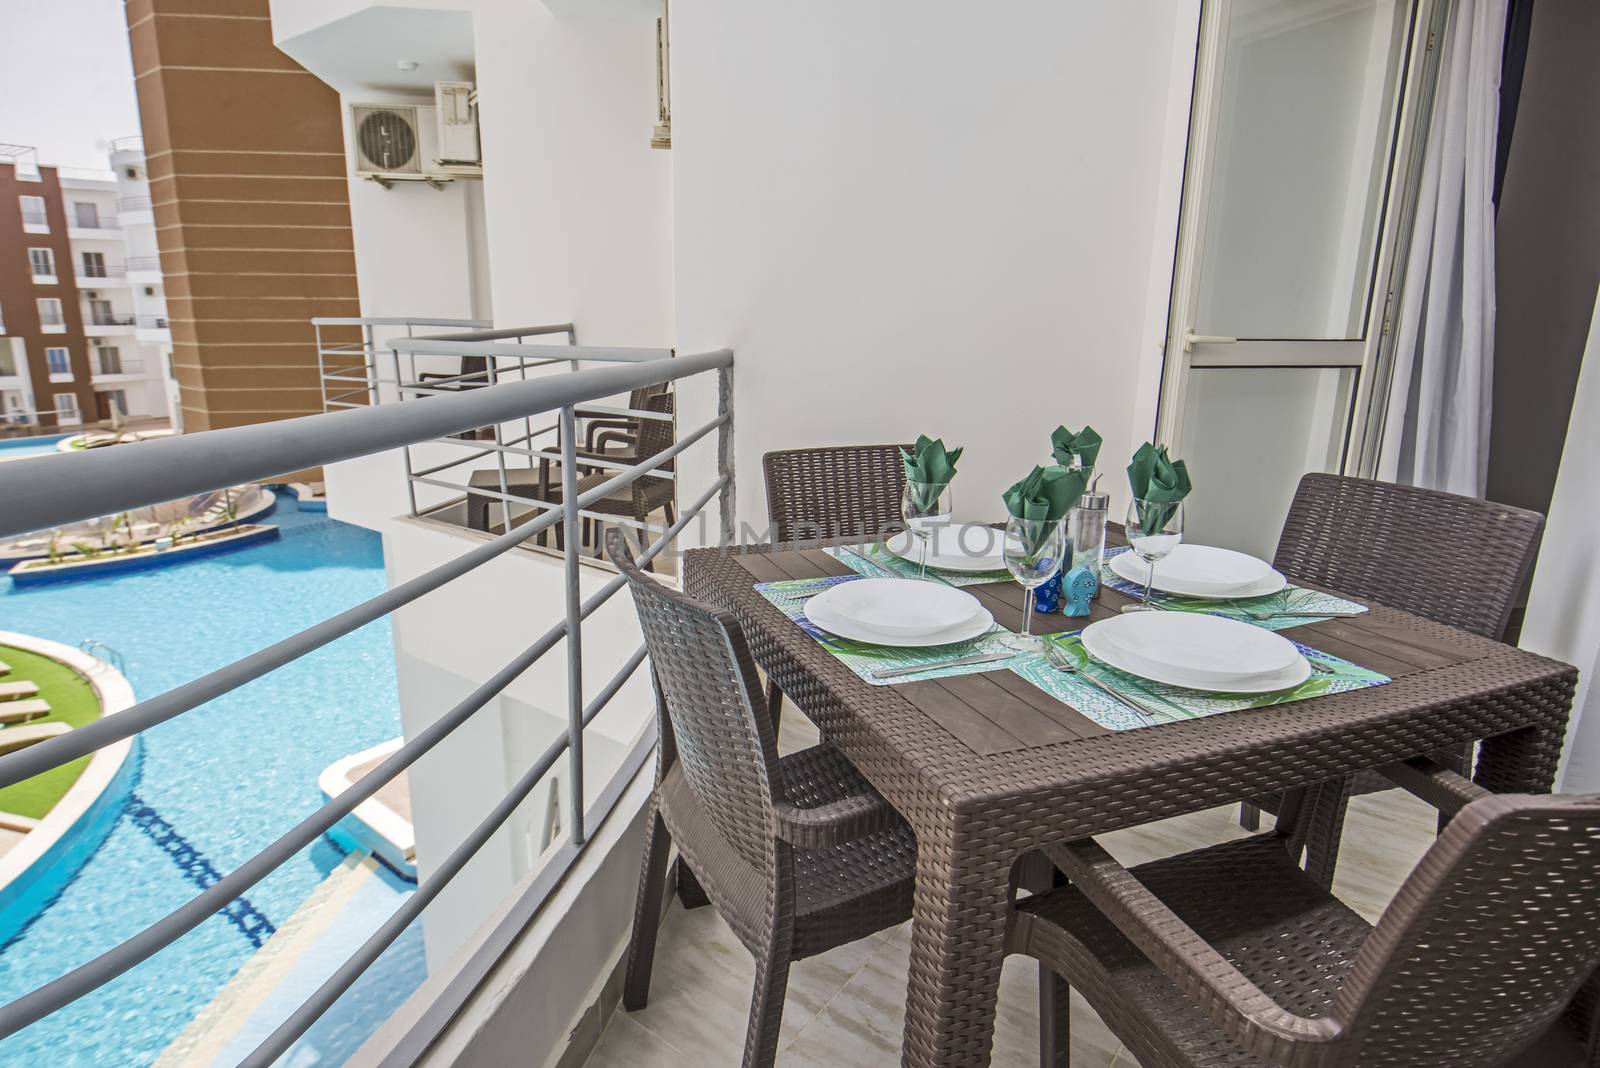 Terrace furniture of a luxury apartment in tropical resort with plastic furniture and pool view